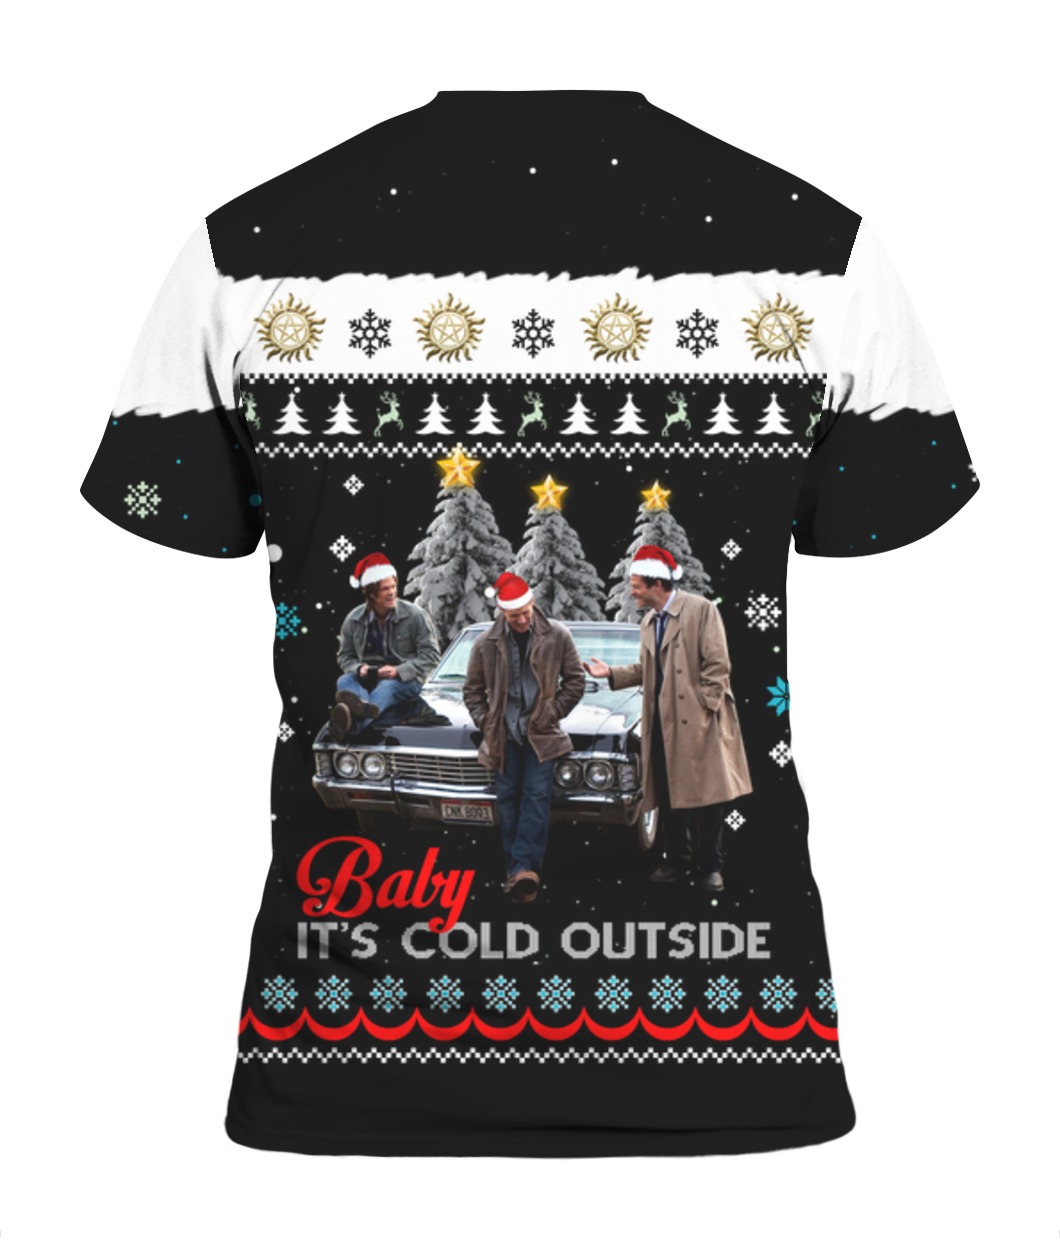 Supernatural baby it's cold outside ugly christmas tshirt - back